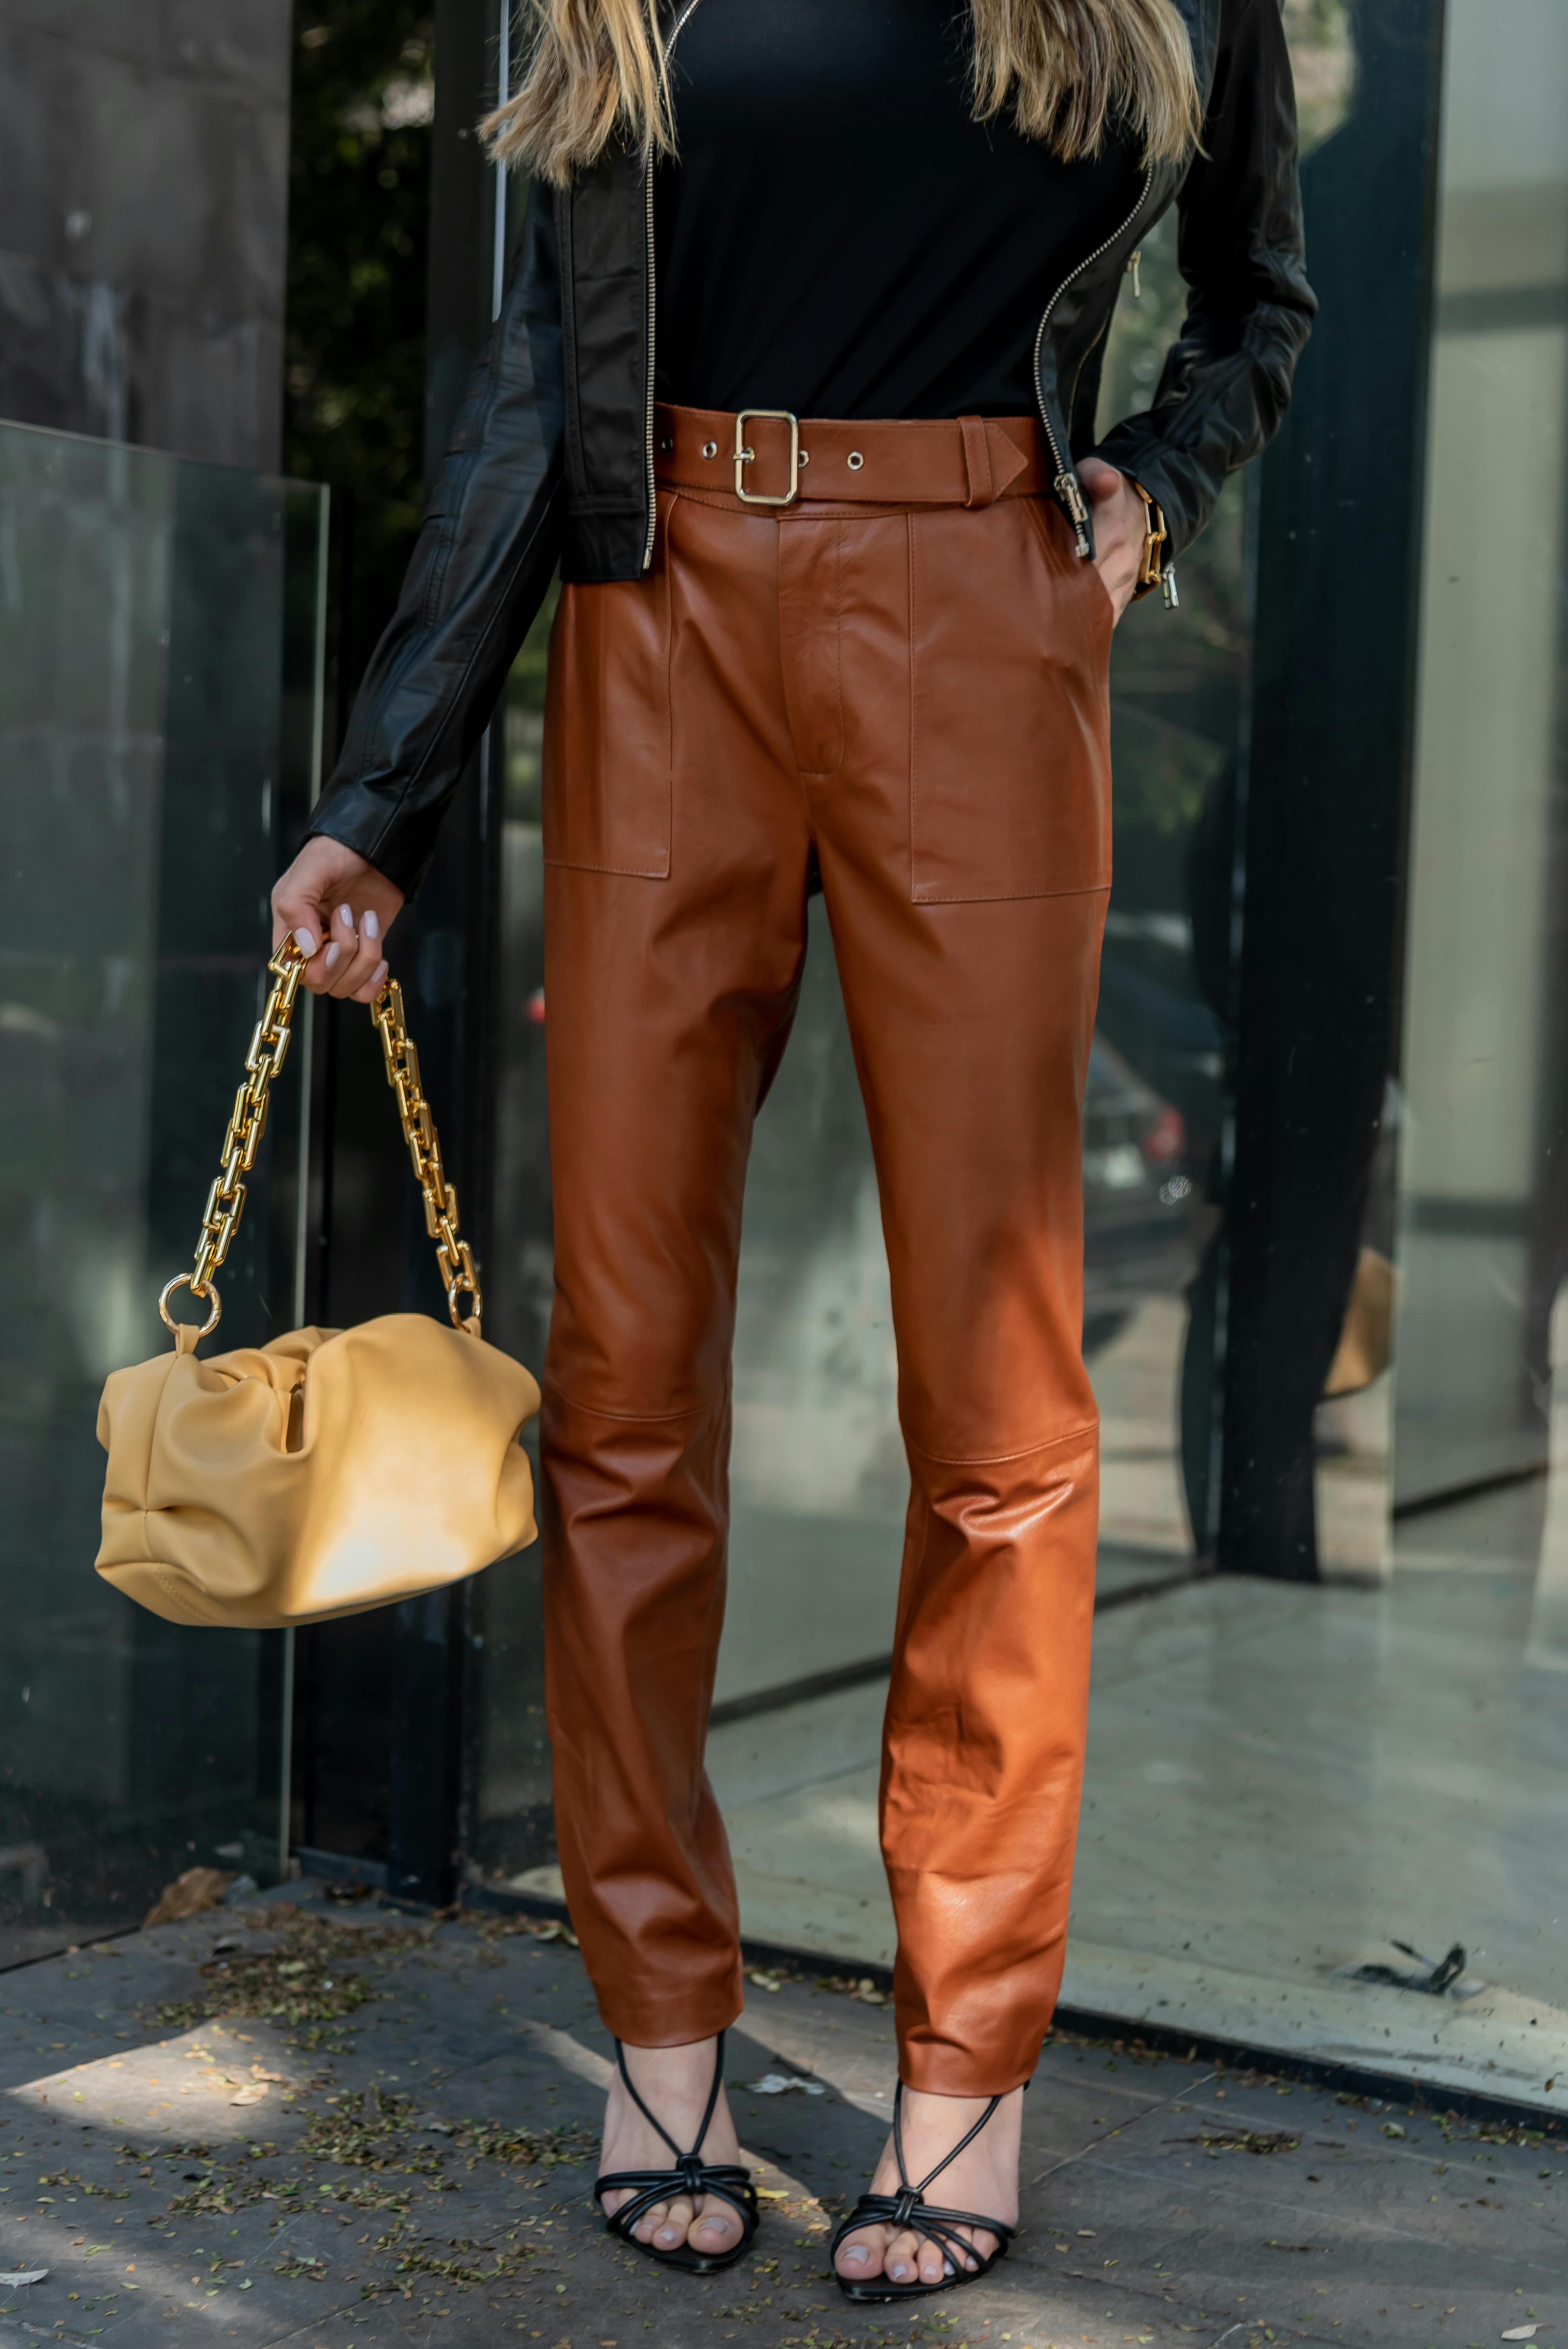 A Woman in Brown Leather Pants · Free Stock Photo